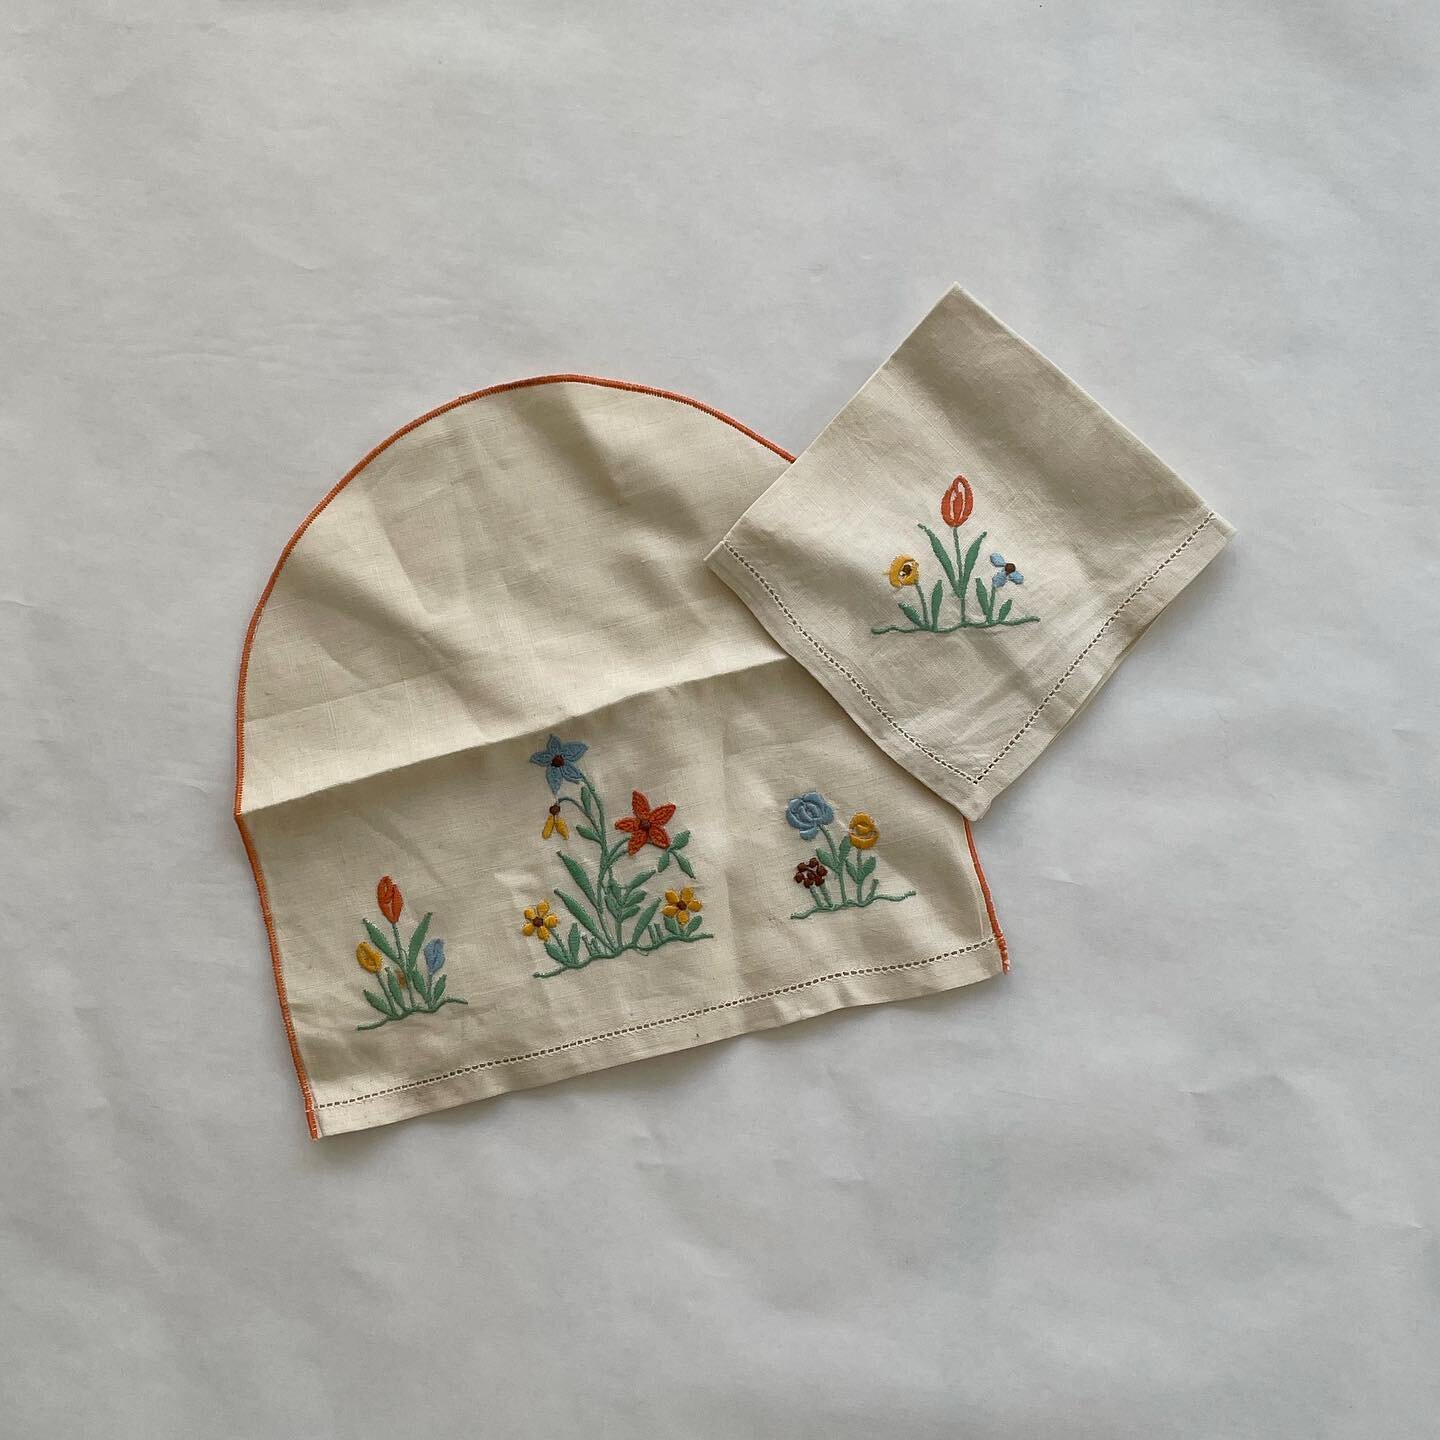 Spring babies🐣 - this #vintageembroidery would made a perfect romper or panel dress for a March birthday 🌷 DM if you&rsquo;d like to order #reducereuserecycle #sustainablekidsfashion #babkids #futureheirlooms #customkidsclothes #madeinbirmingham